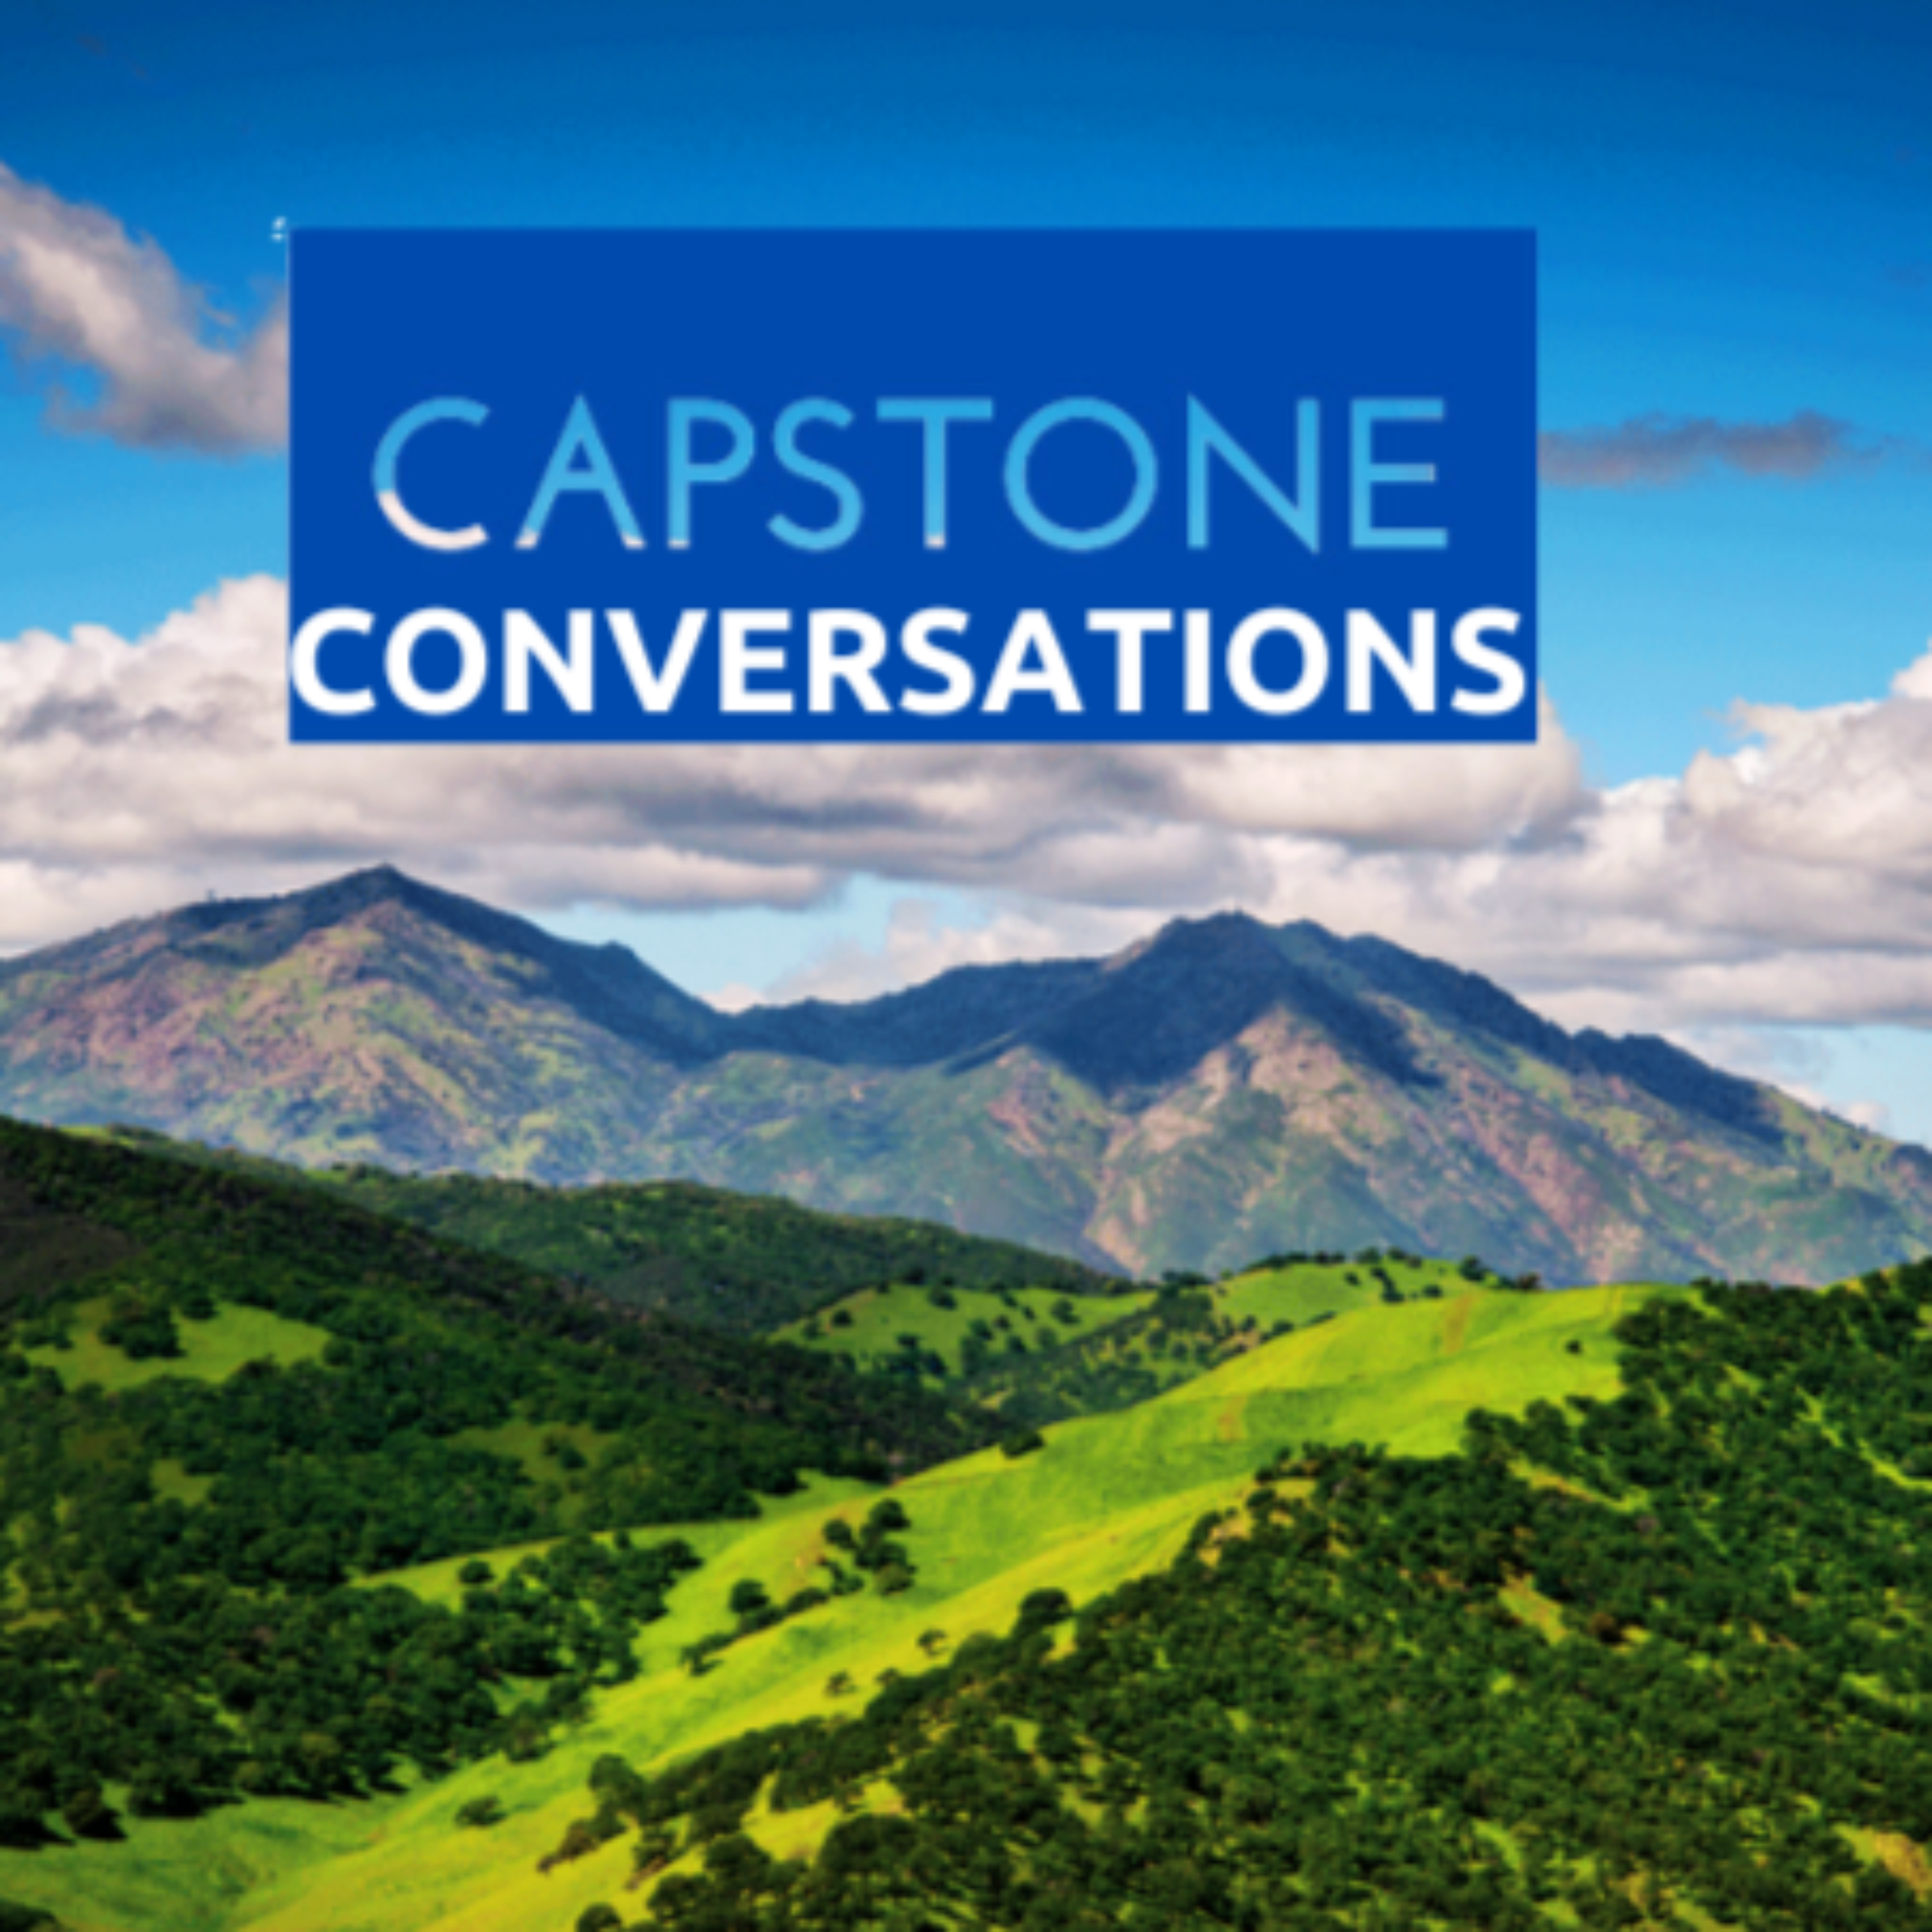 Fresh update on "three people" discussed on Capstone Conversation